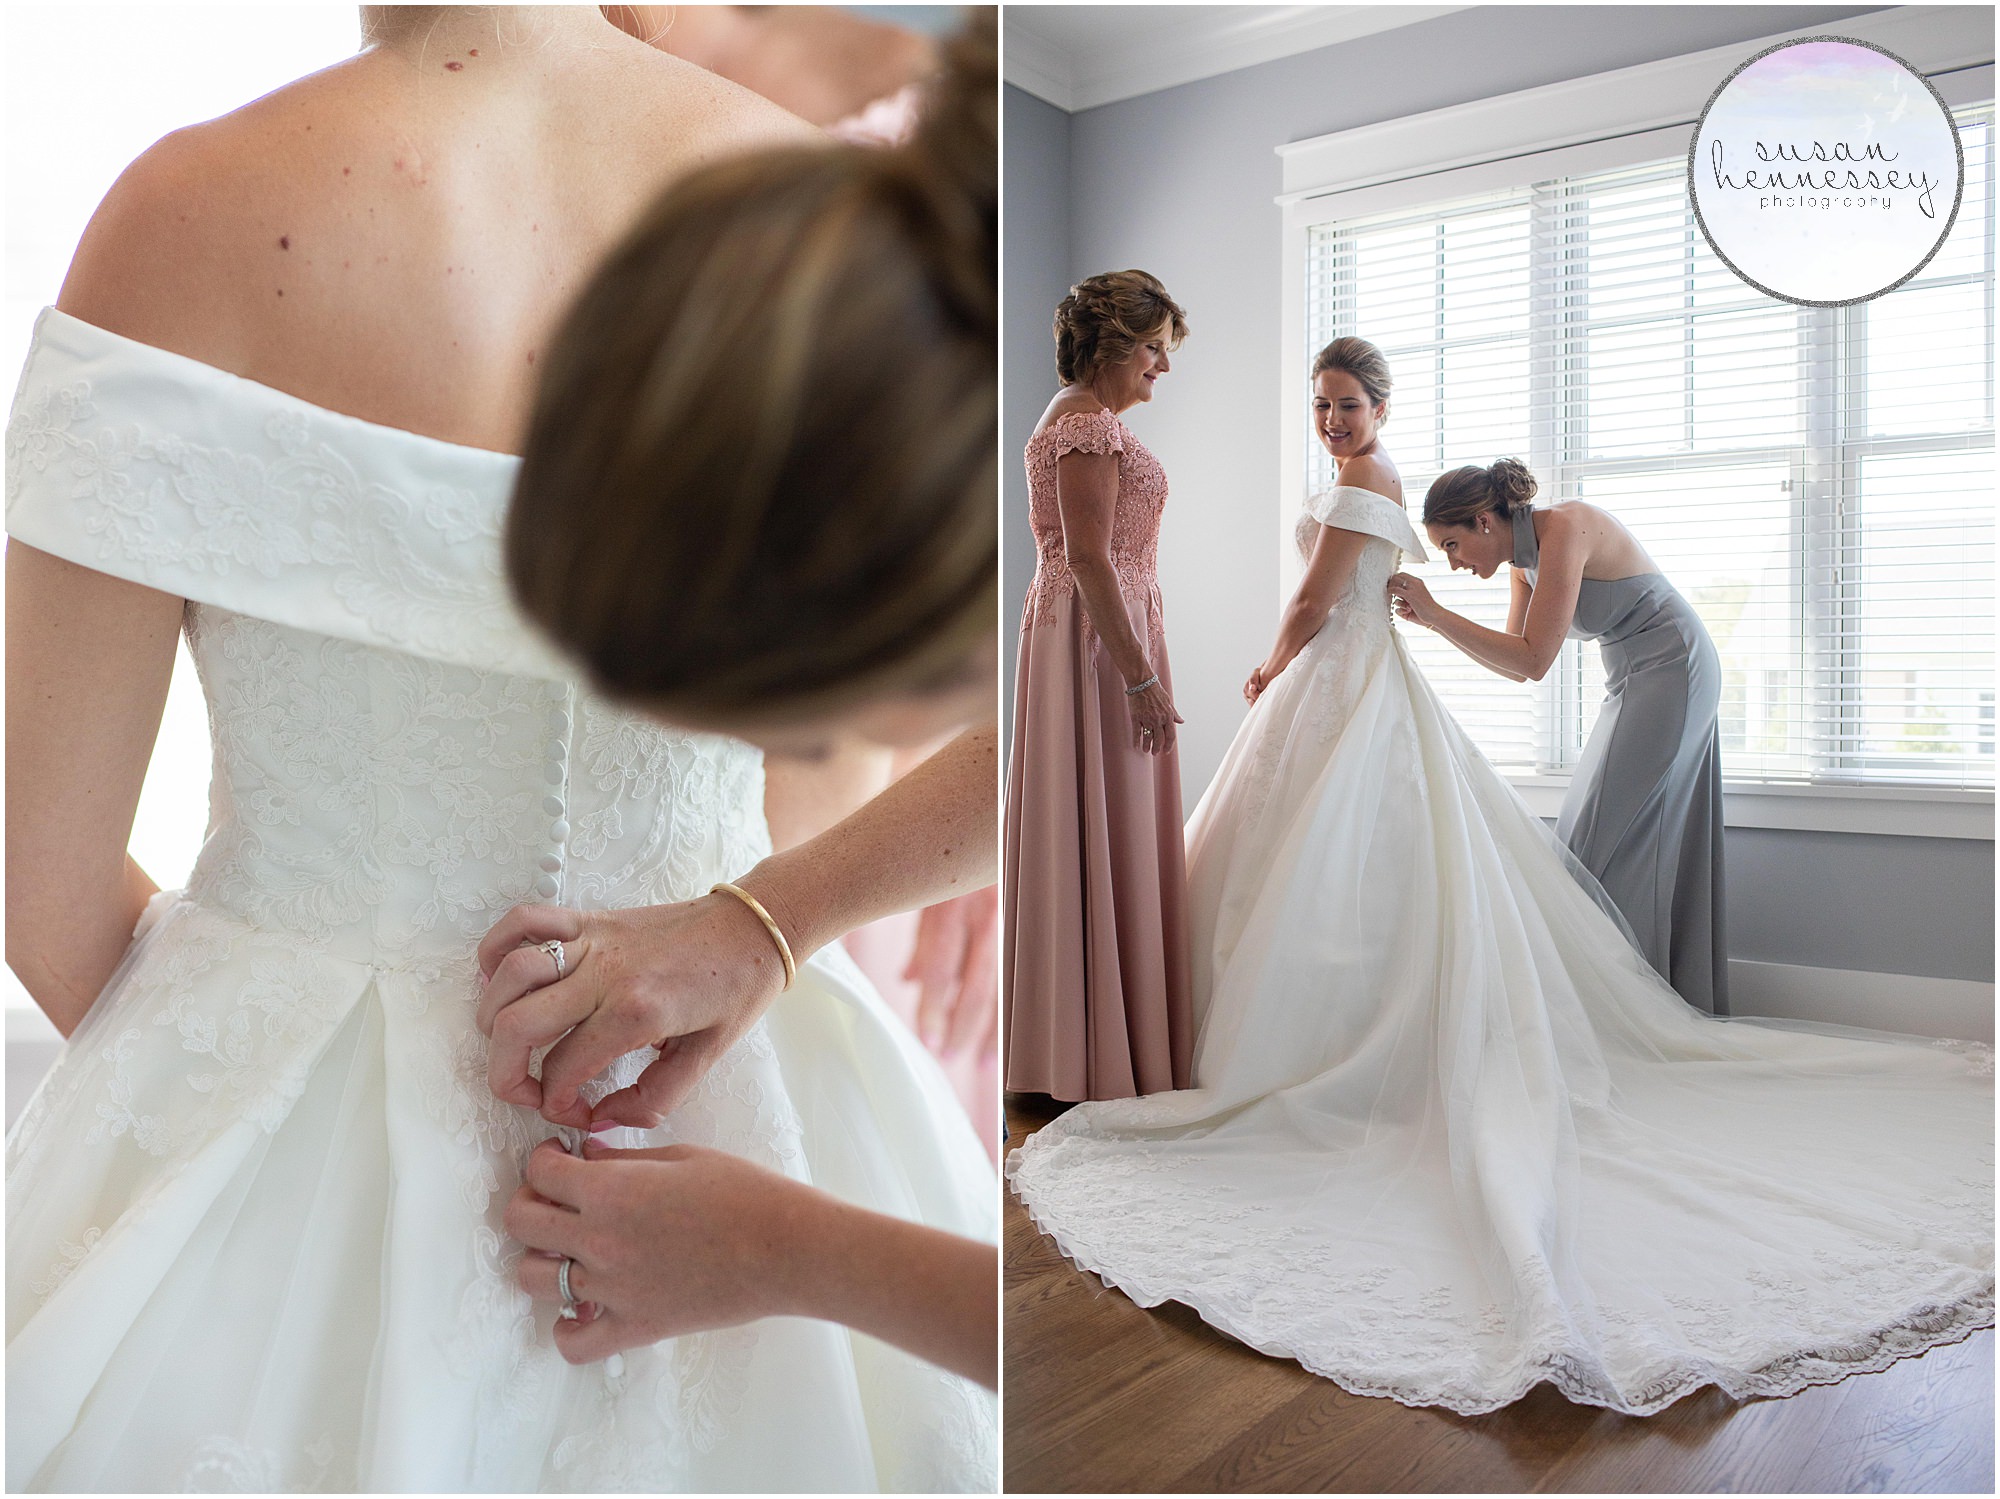 The mother and maid of honor help bride into her elegant and classic wedding gown